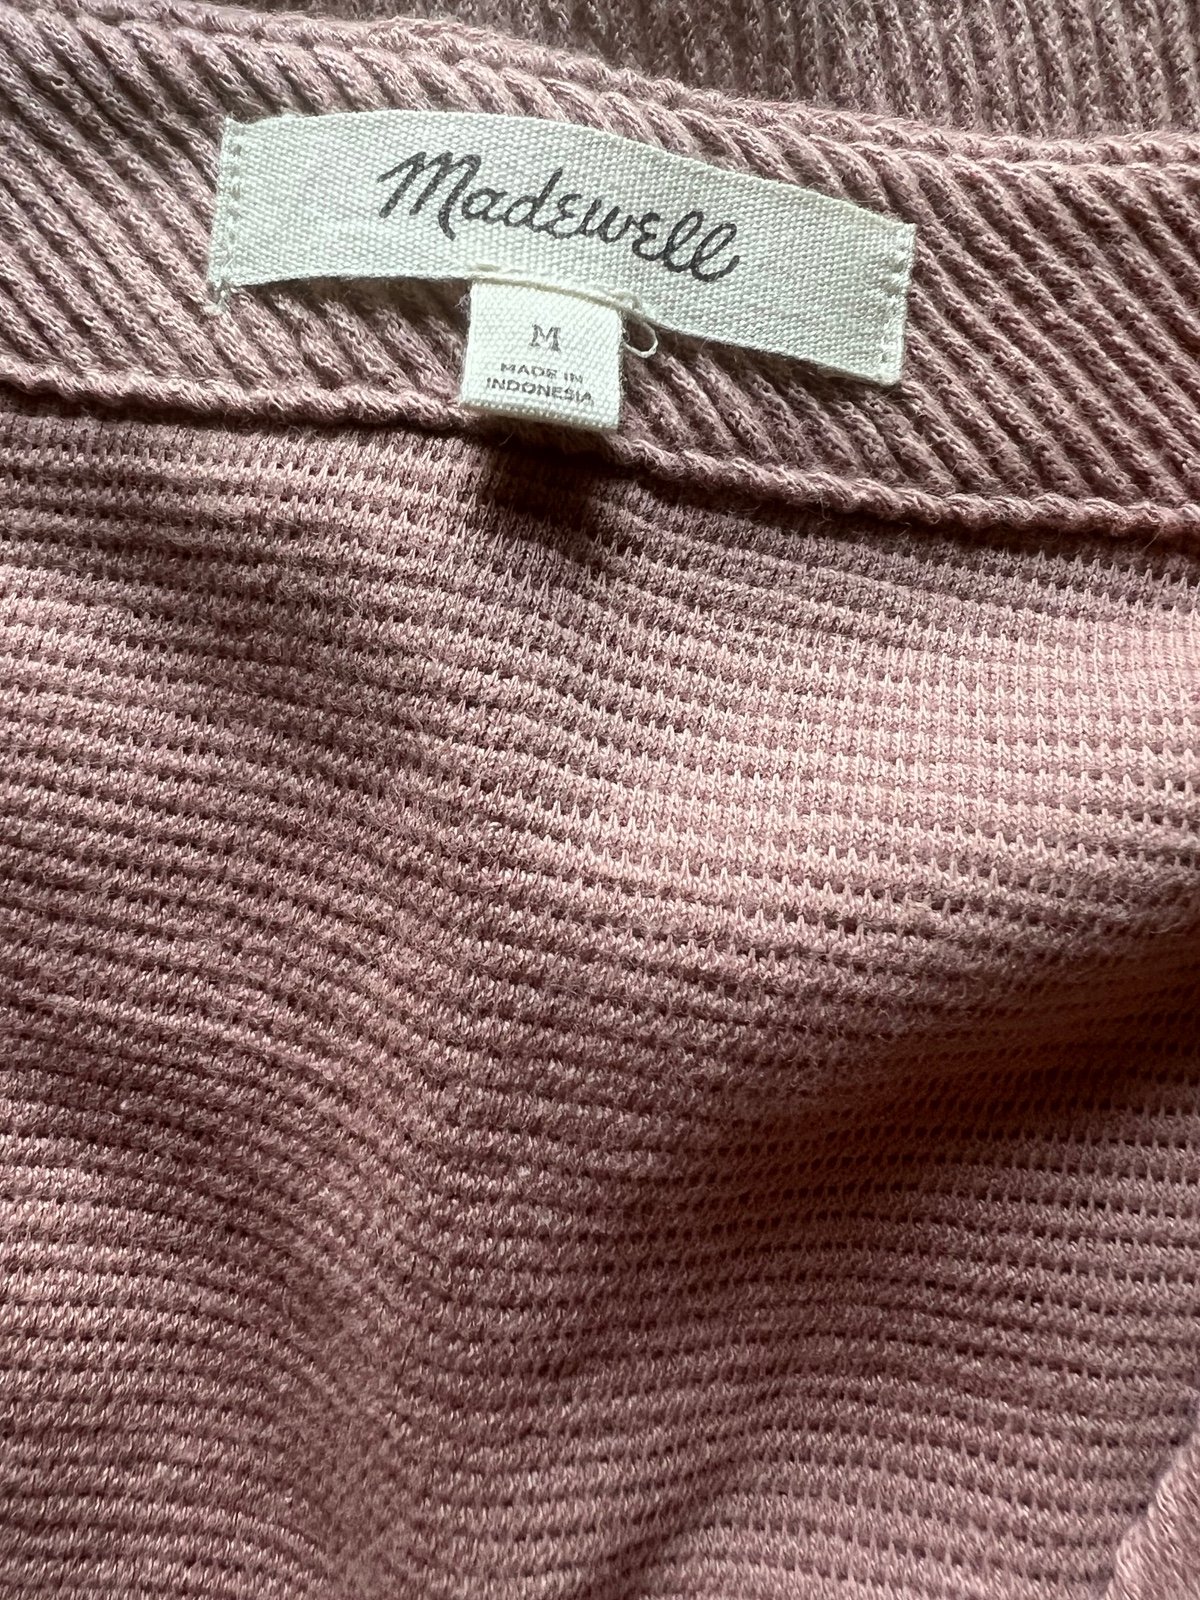 Affordable Madewell ribbed v neck pink mauve blouse top jSgsUsciv just for you